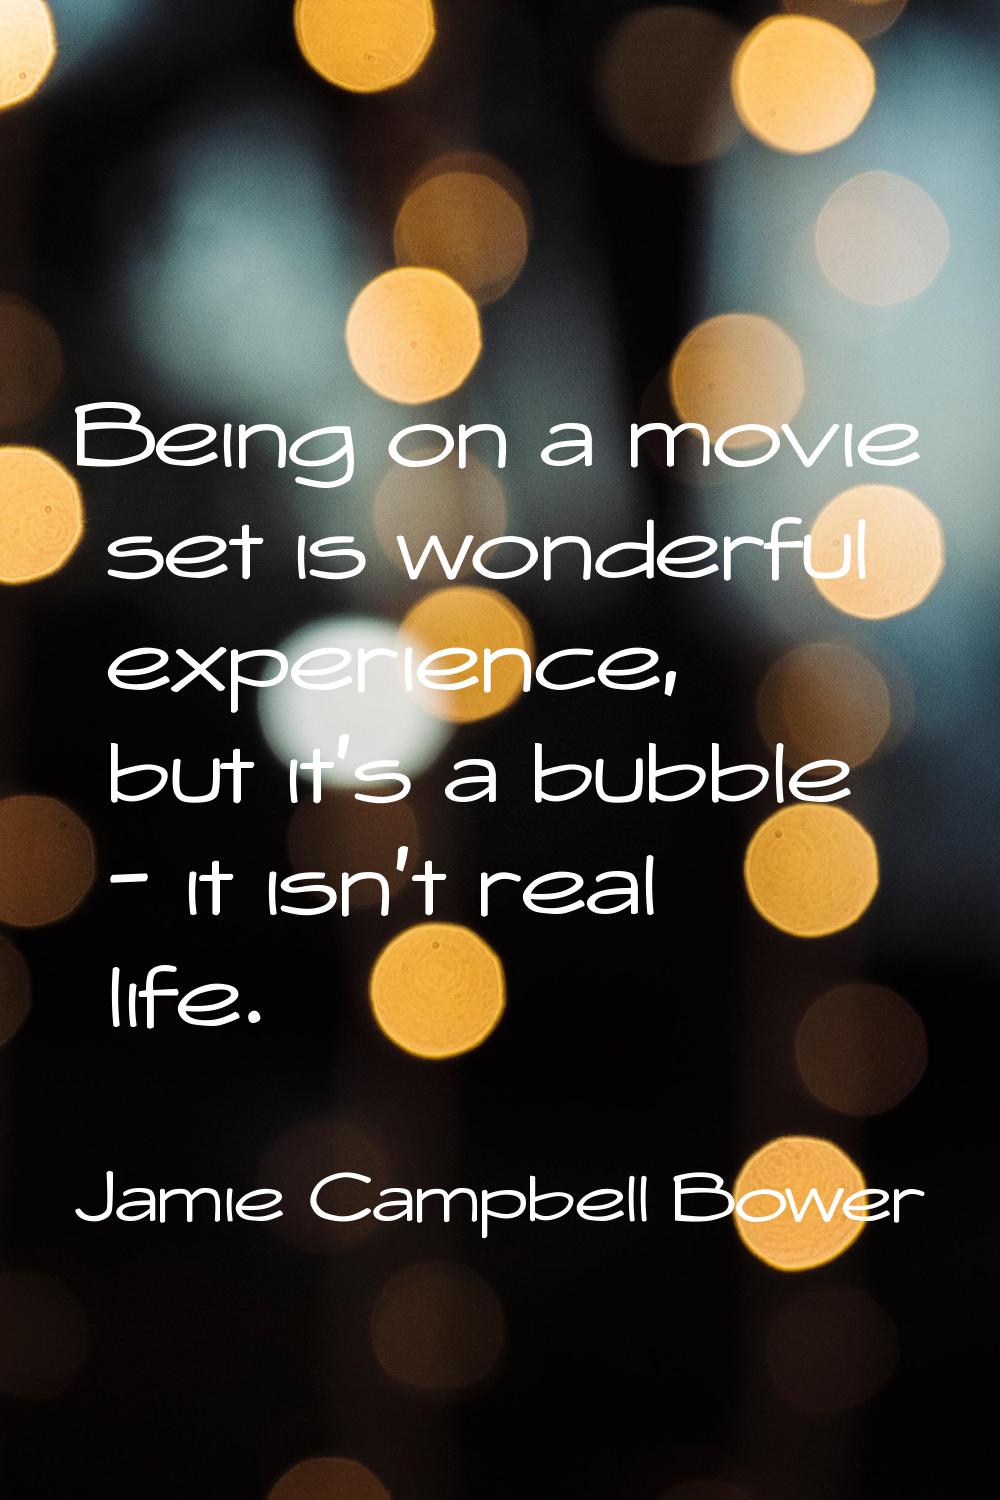 Being on a movie set is wonderful experience, but it's a bubble - it isn't real life.